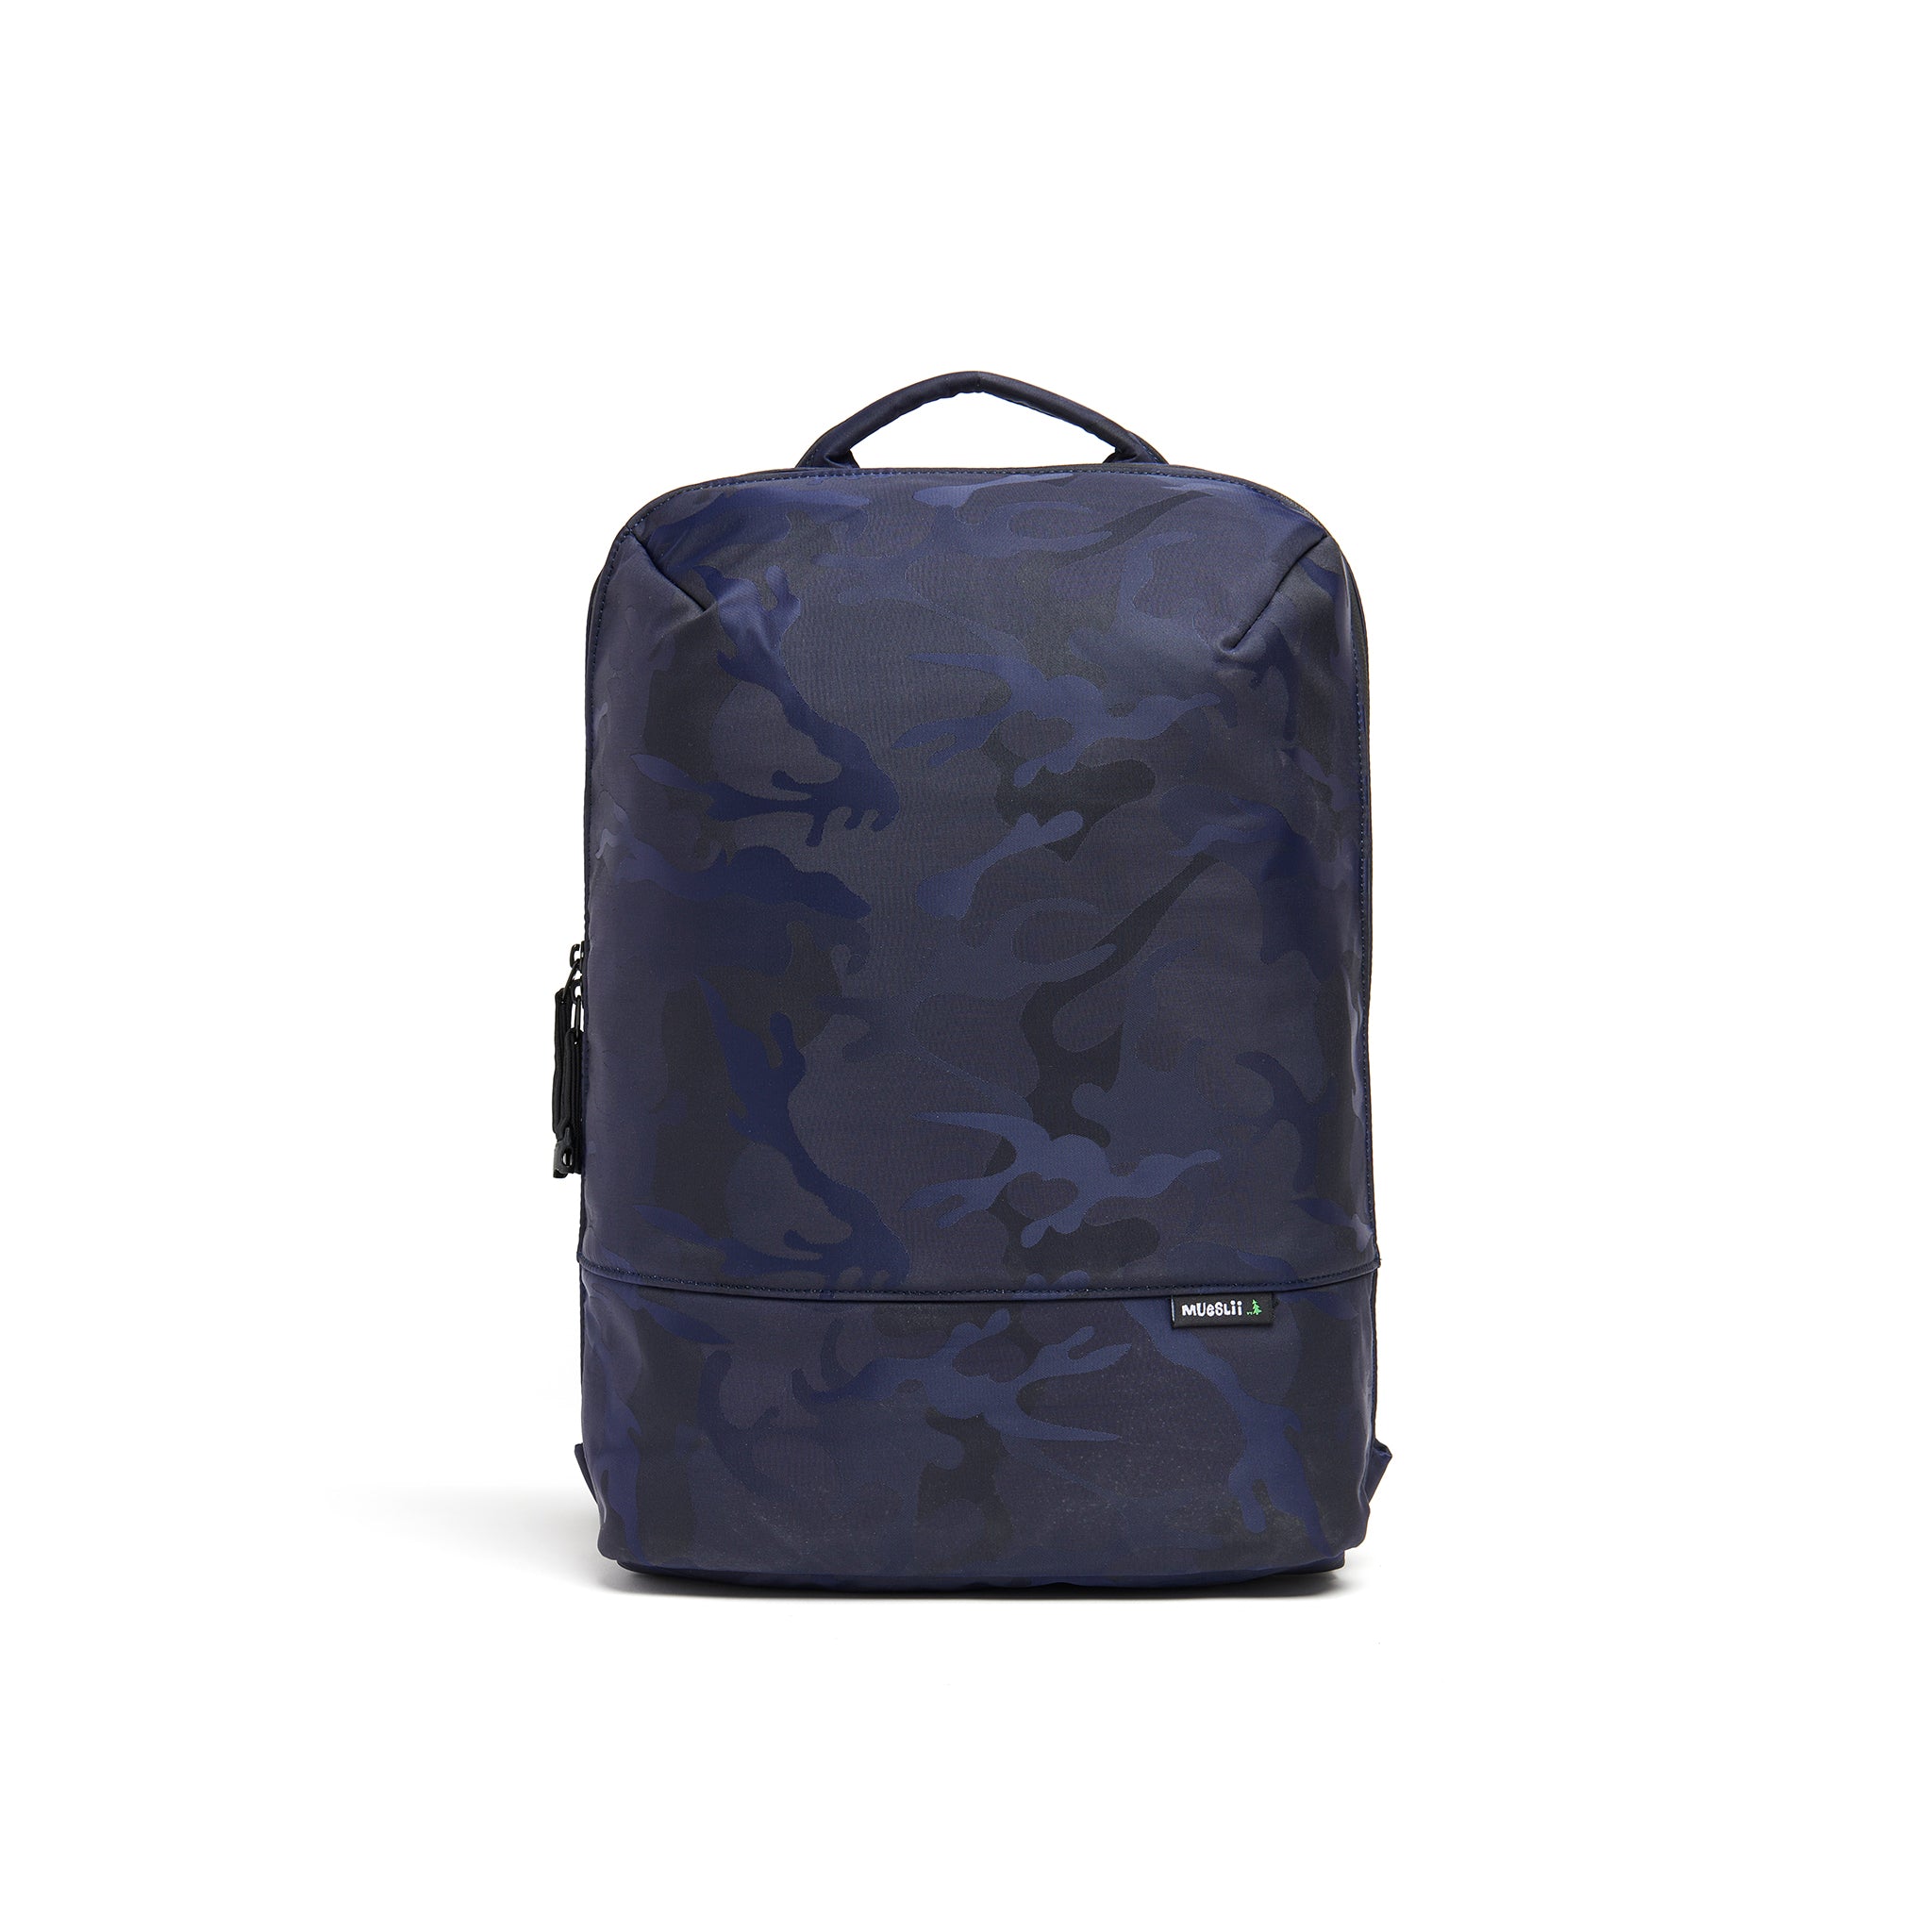 Mueslii daily backpack, made of jacquard  waterproof nylon, camouflage pattern, with a laptop compartment, color blue, front view.